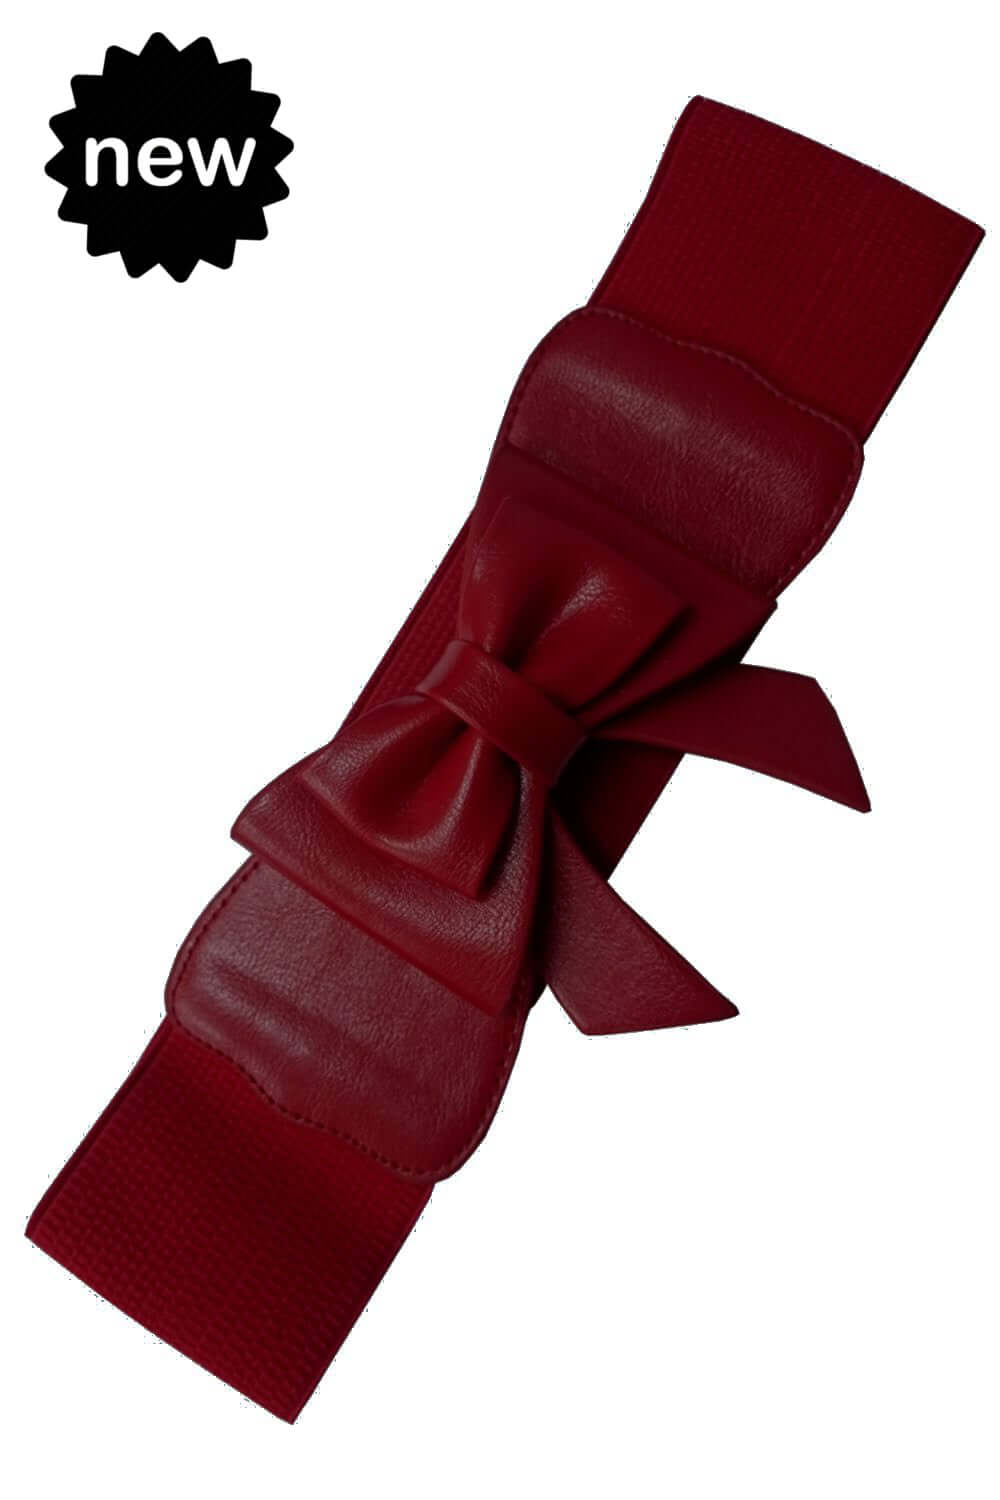 Dancing Days 50s Style Retro Elasticated Belt With Bow In Burgundy; Dancing Days; 50s Retro Style; Elasticated Belt; Burgundy Bow Design; Burgundy